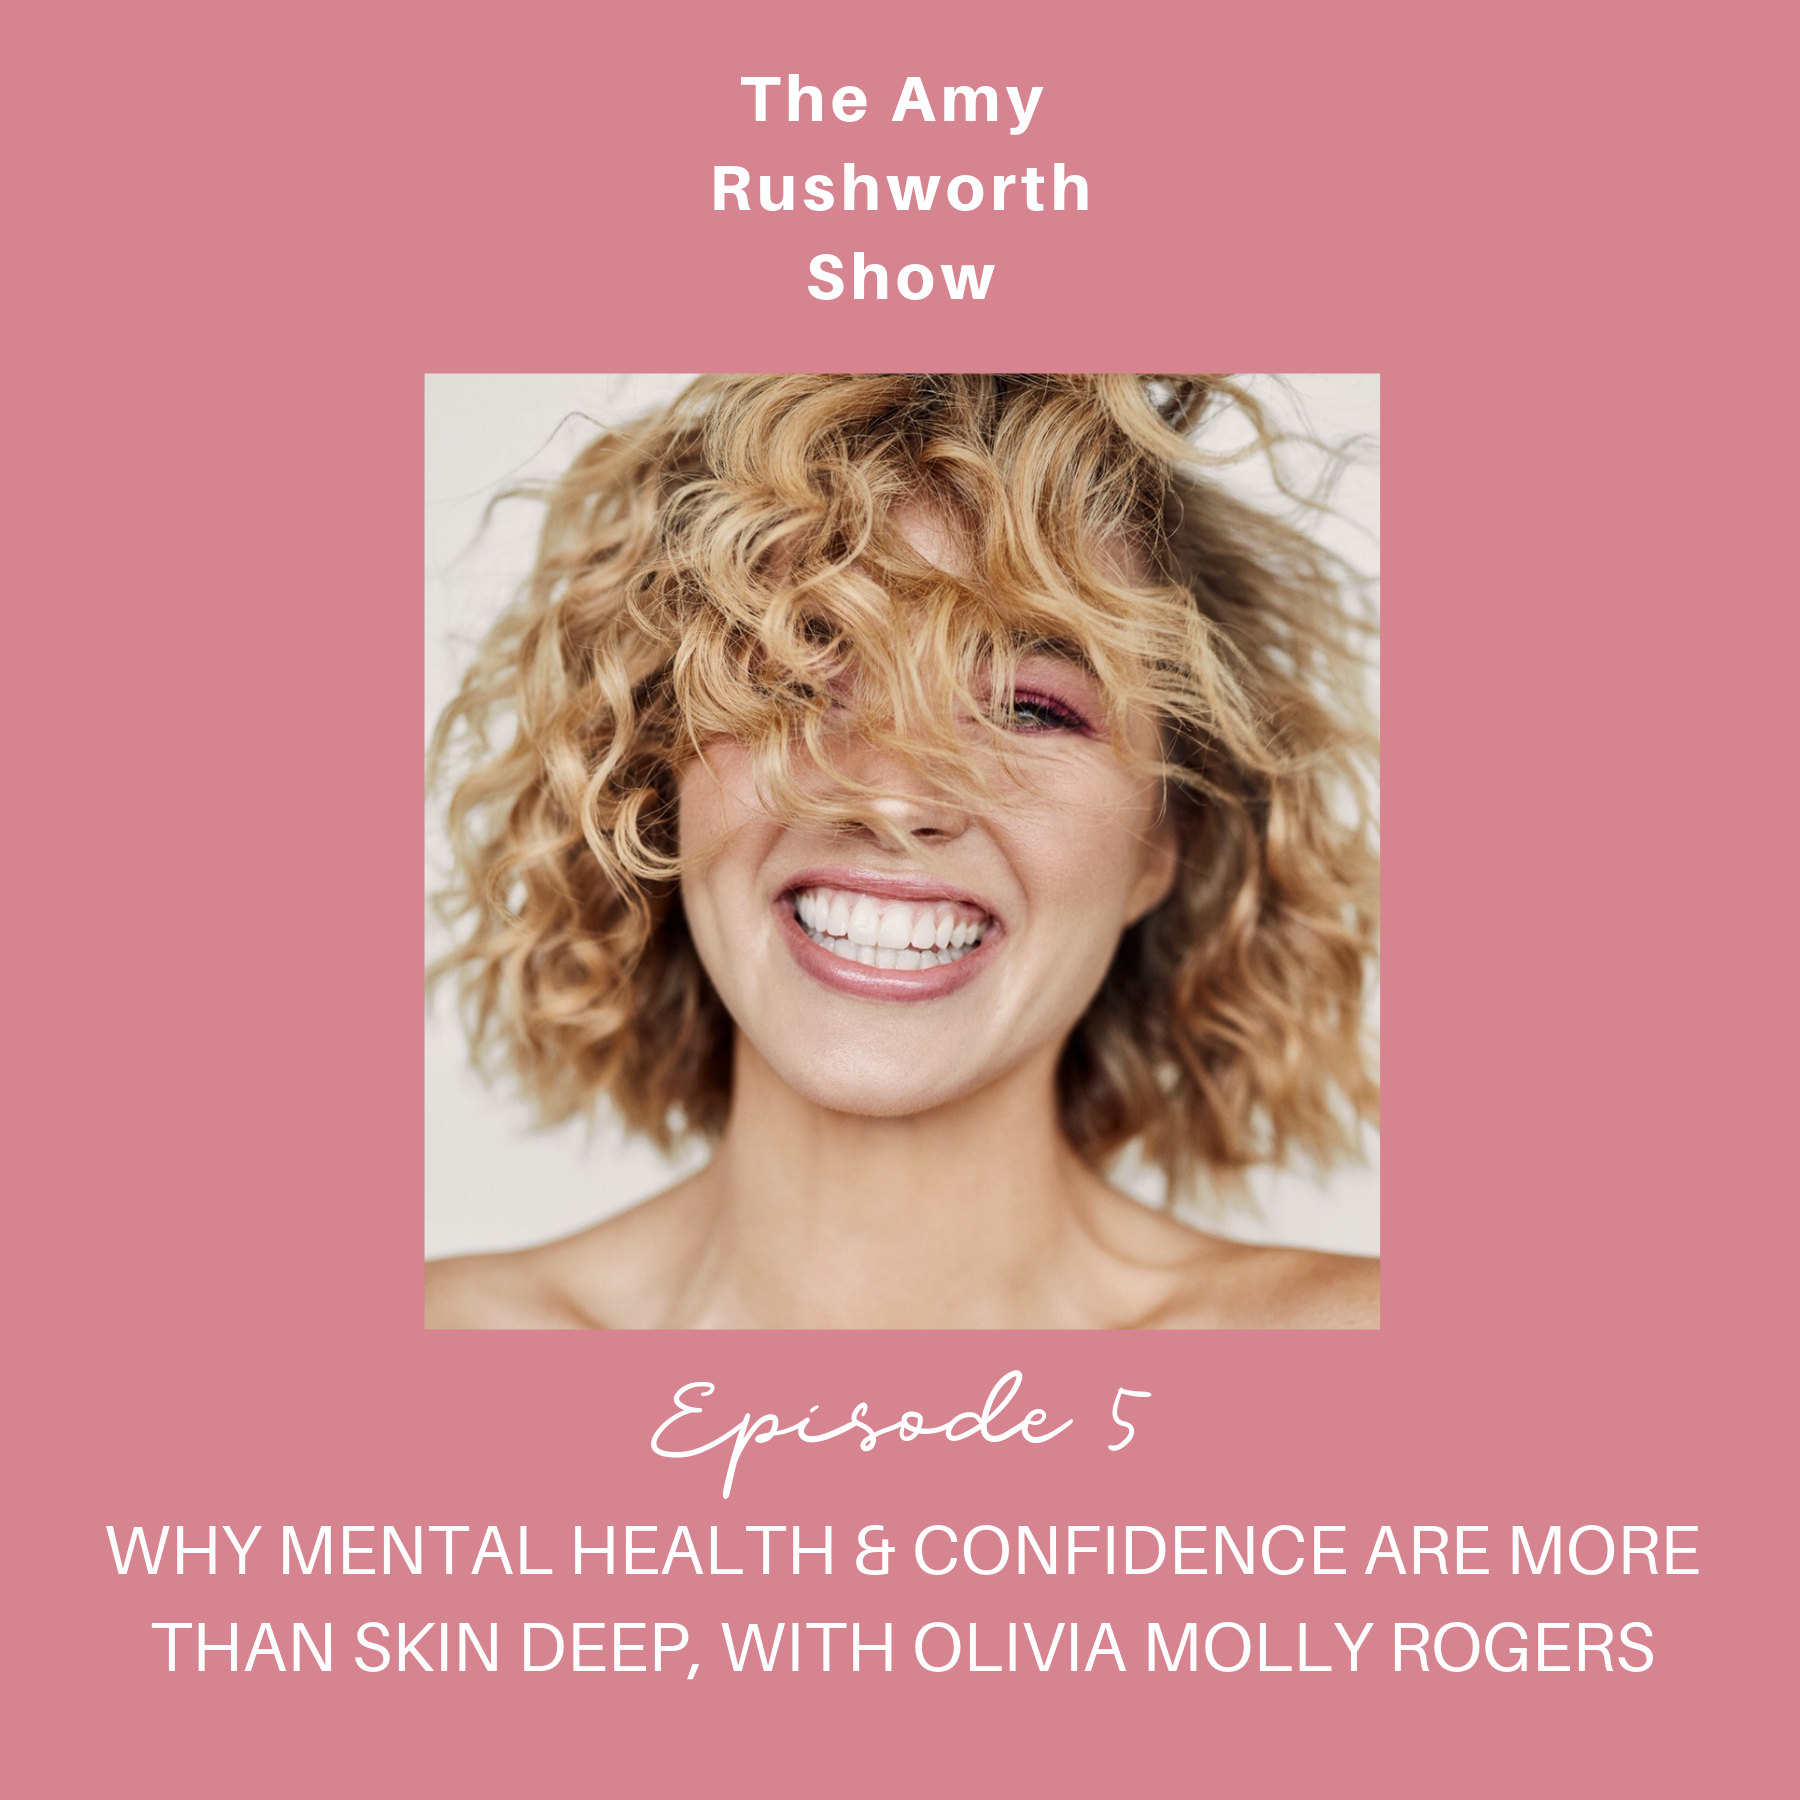 Episode 5: Why Mental Health & Confidence Are More Than Skip Deep with Olivia Molly Rogers